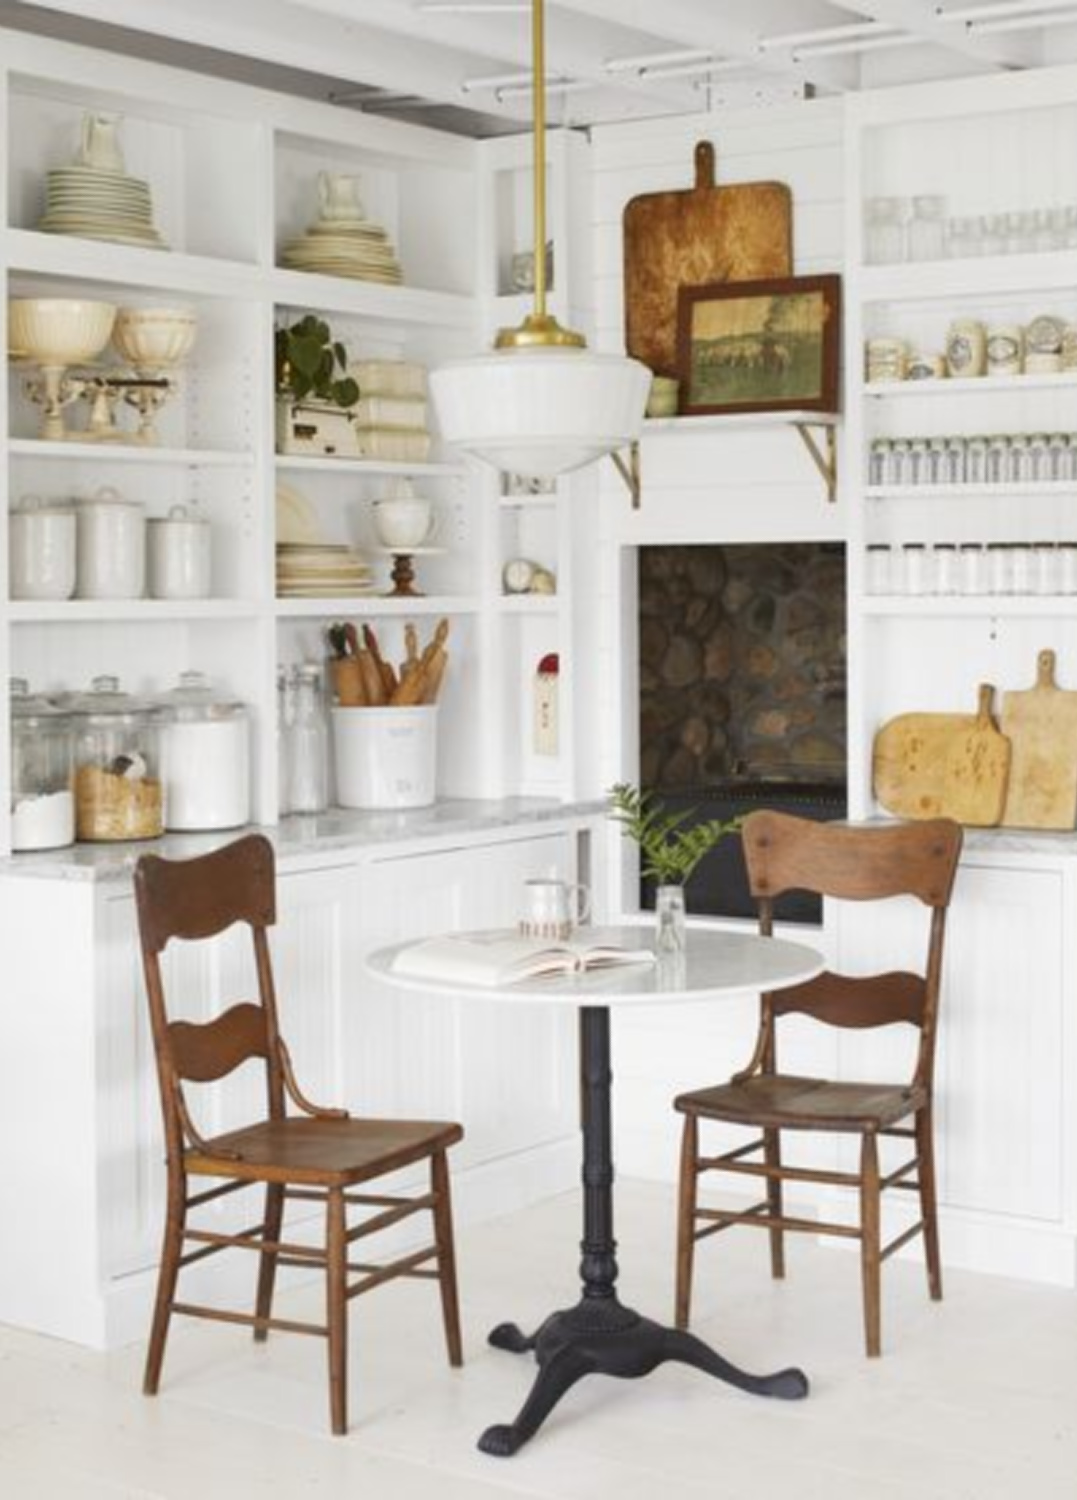 Charming country kitchen breakfast nook with bistro table - photo by David Tsay. #breakfastnooks #farmhousekitchens